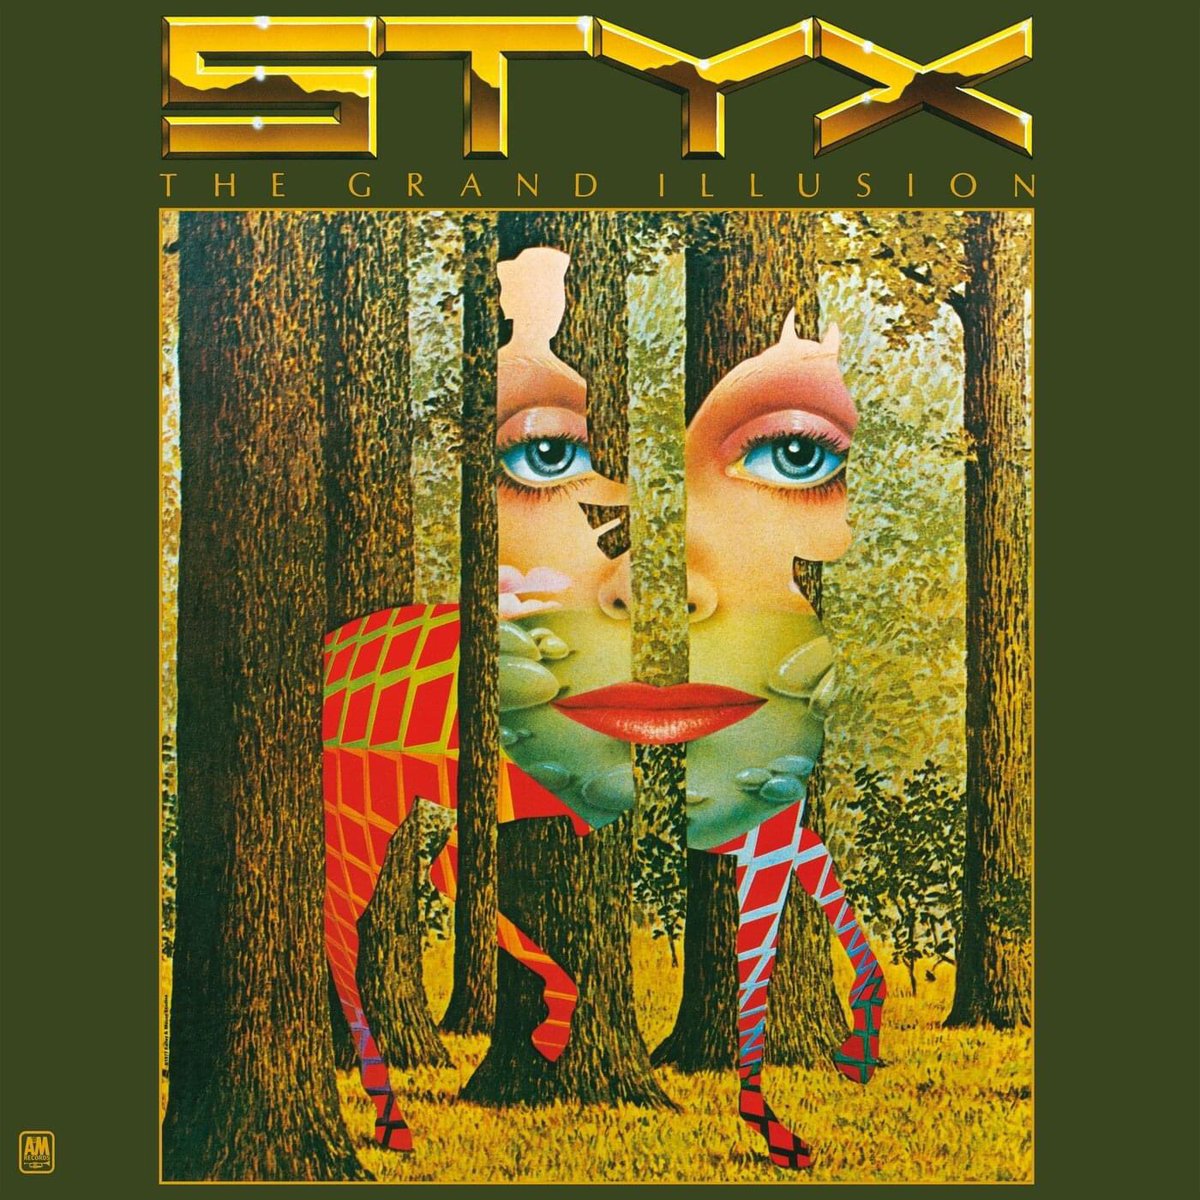 This Styx masterpiece turns 45 today! Their 7th album, released July 7th 1977.
#Styx #PompRock